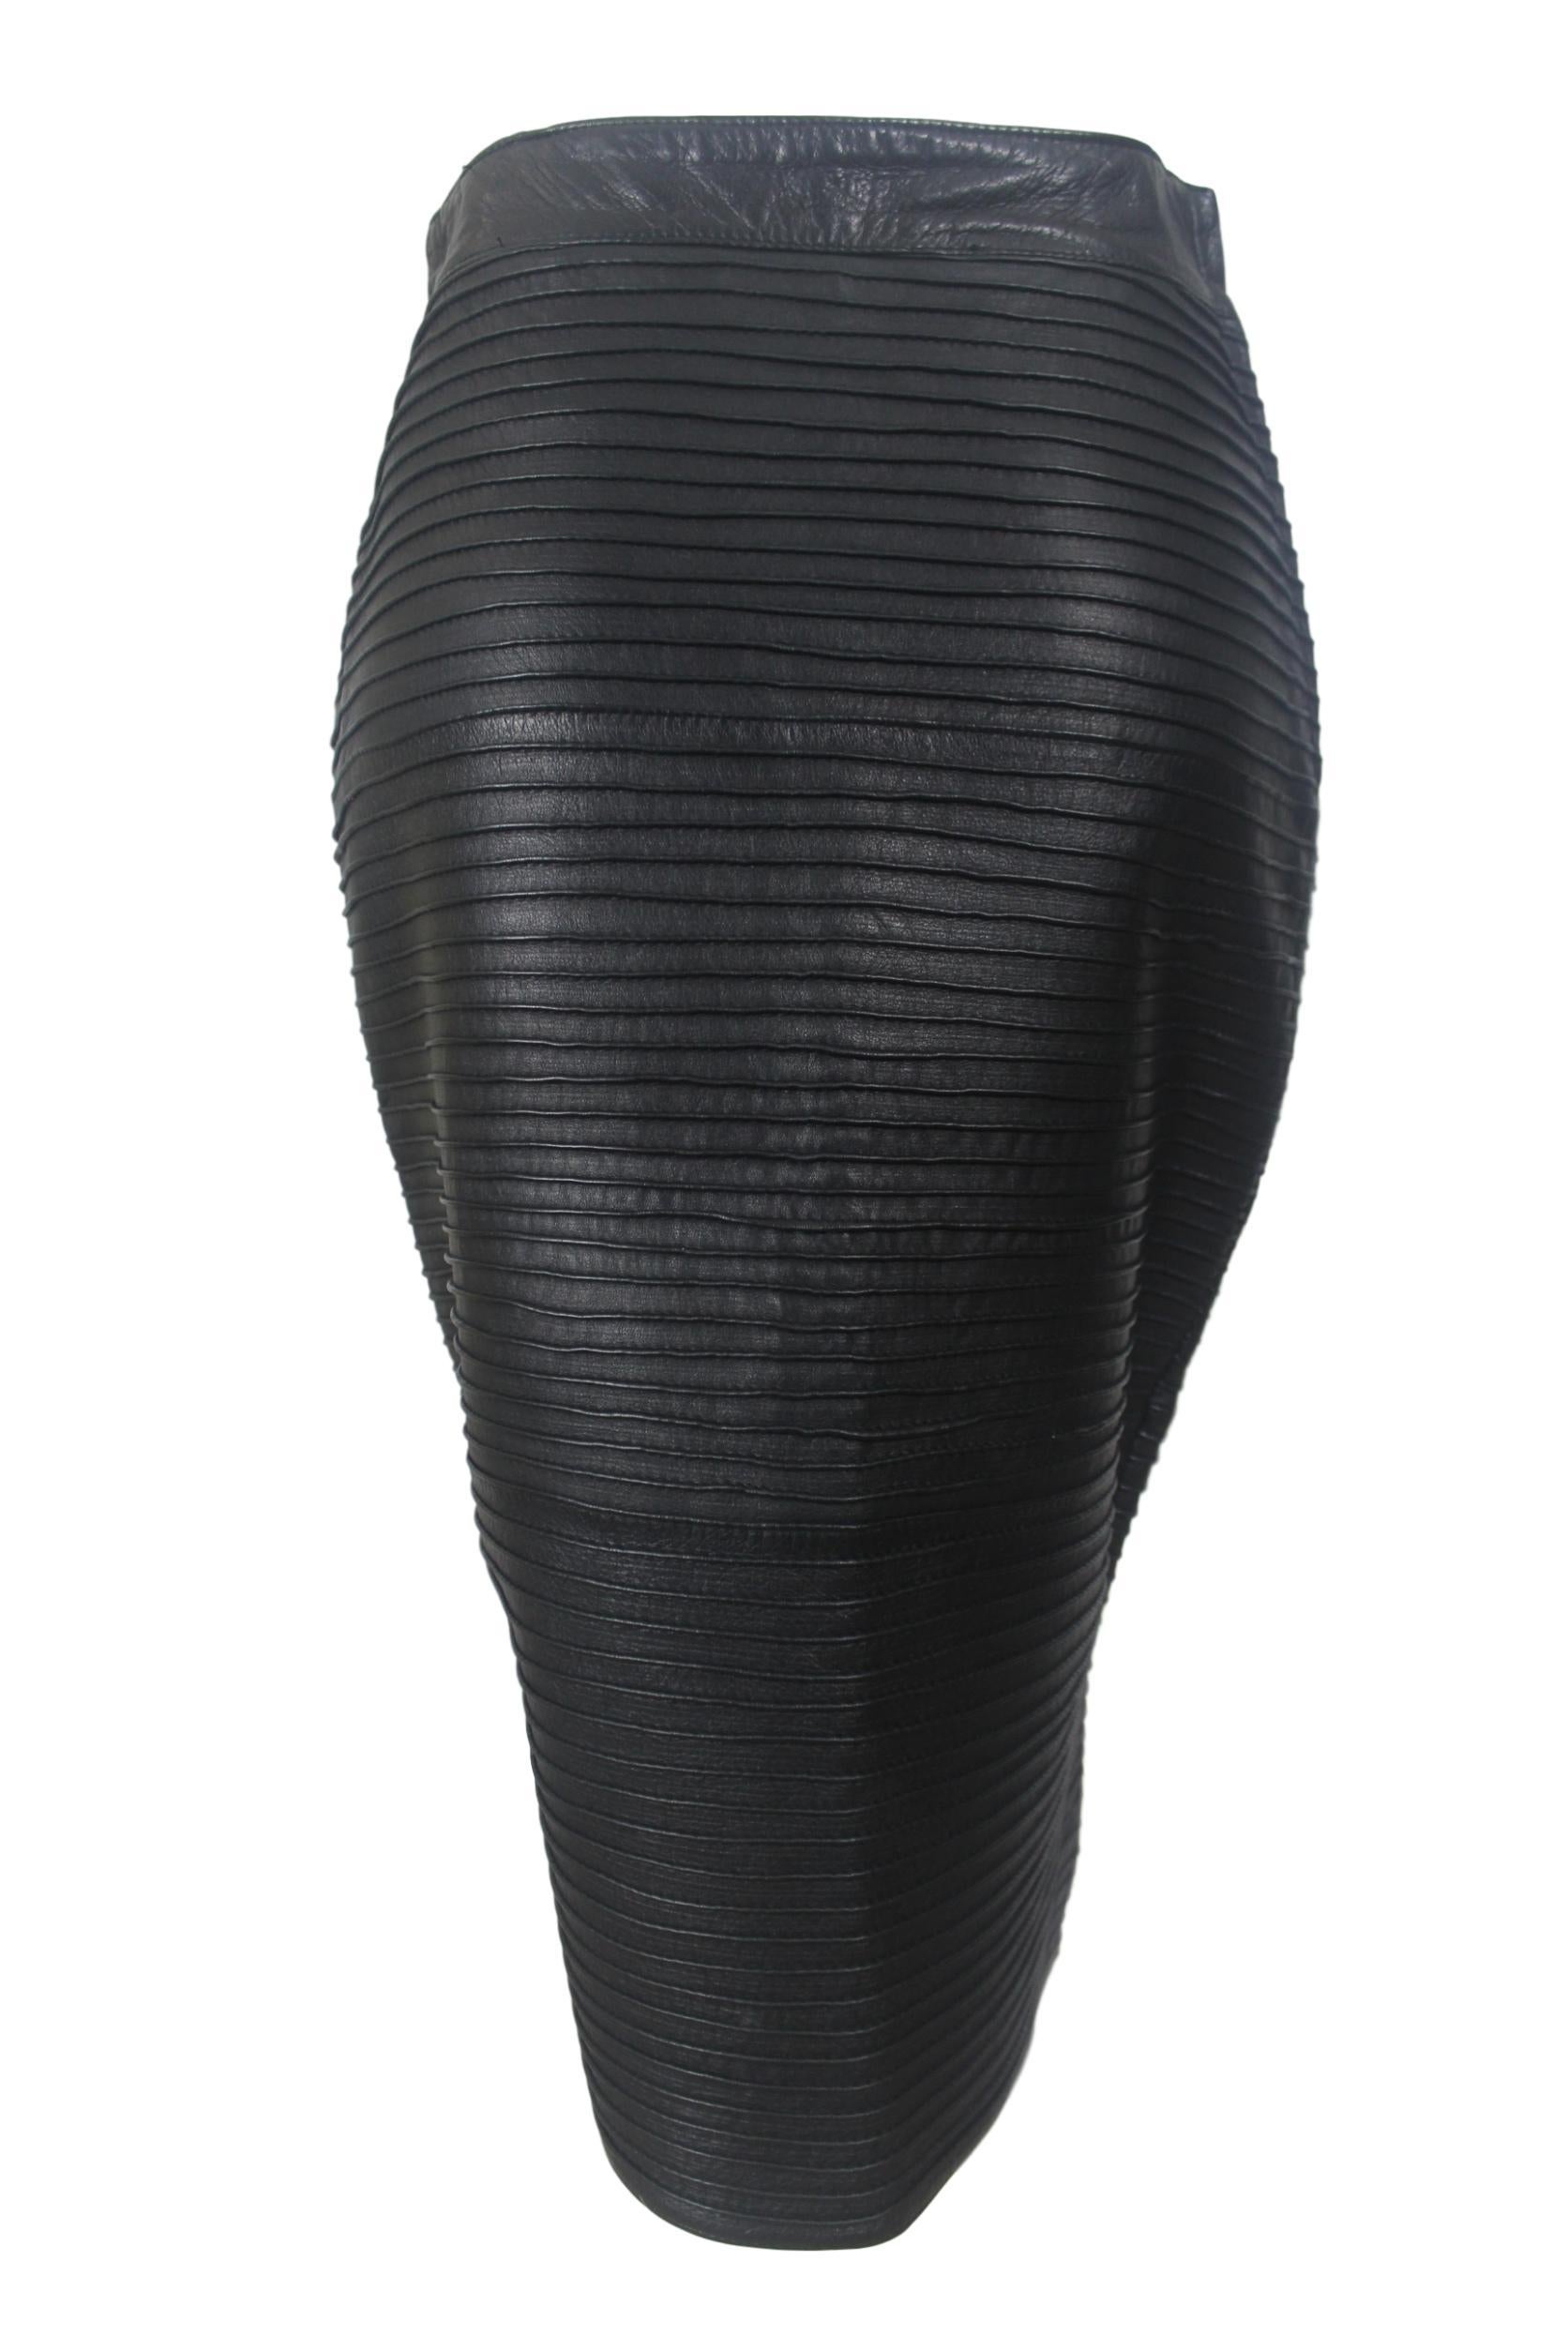 Gianni Versace 1990s Leather Skirt For Sale 1